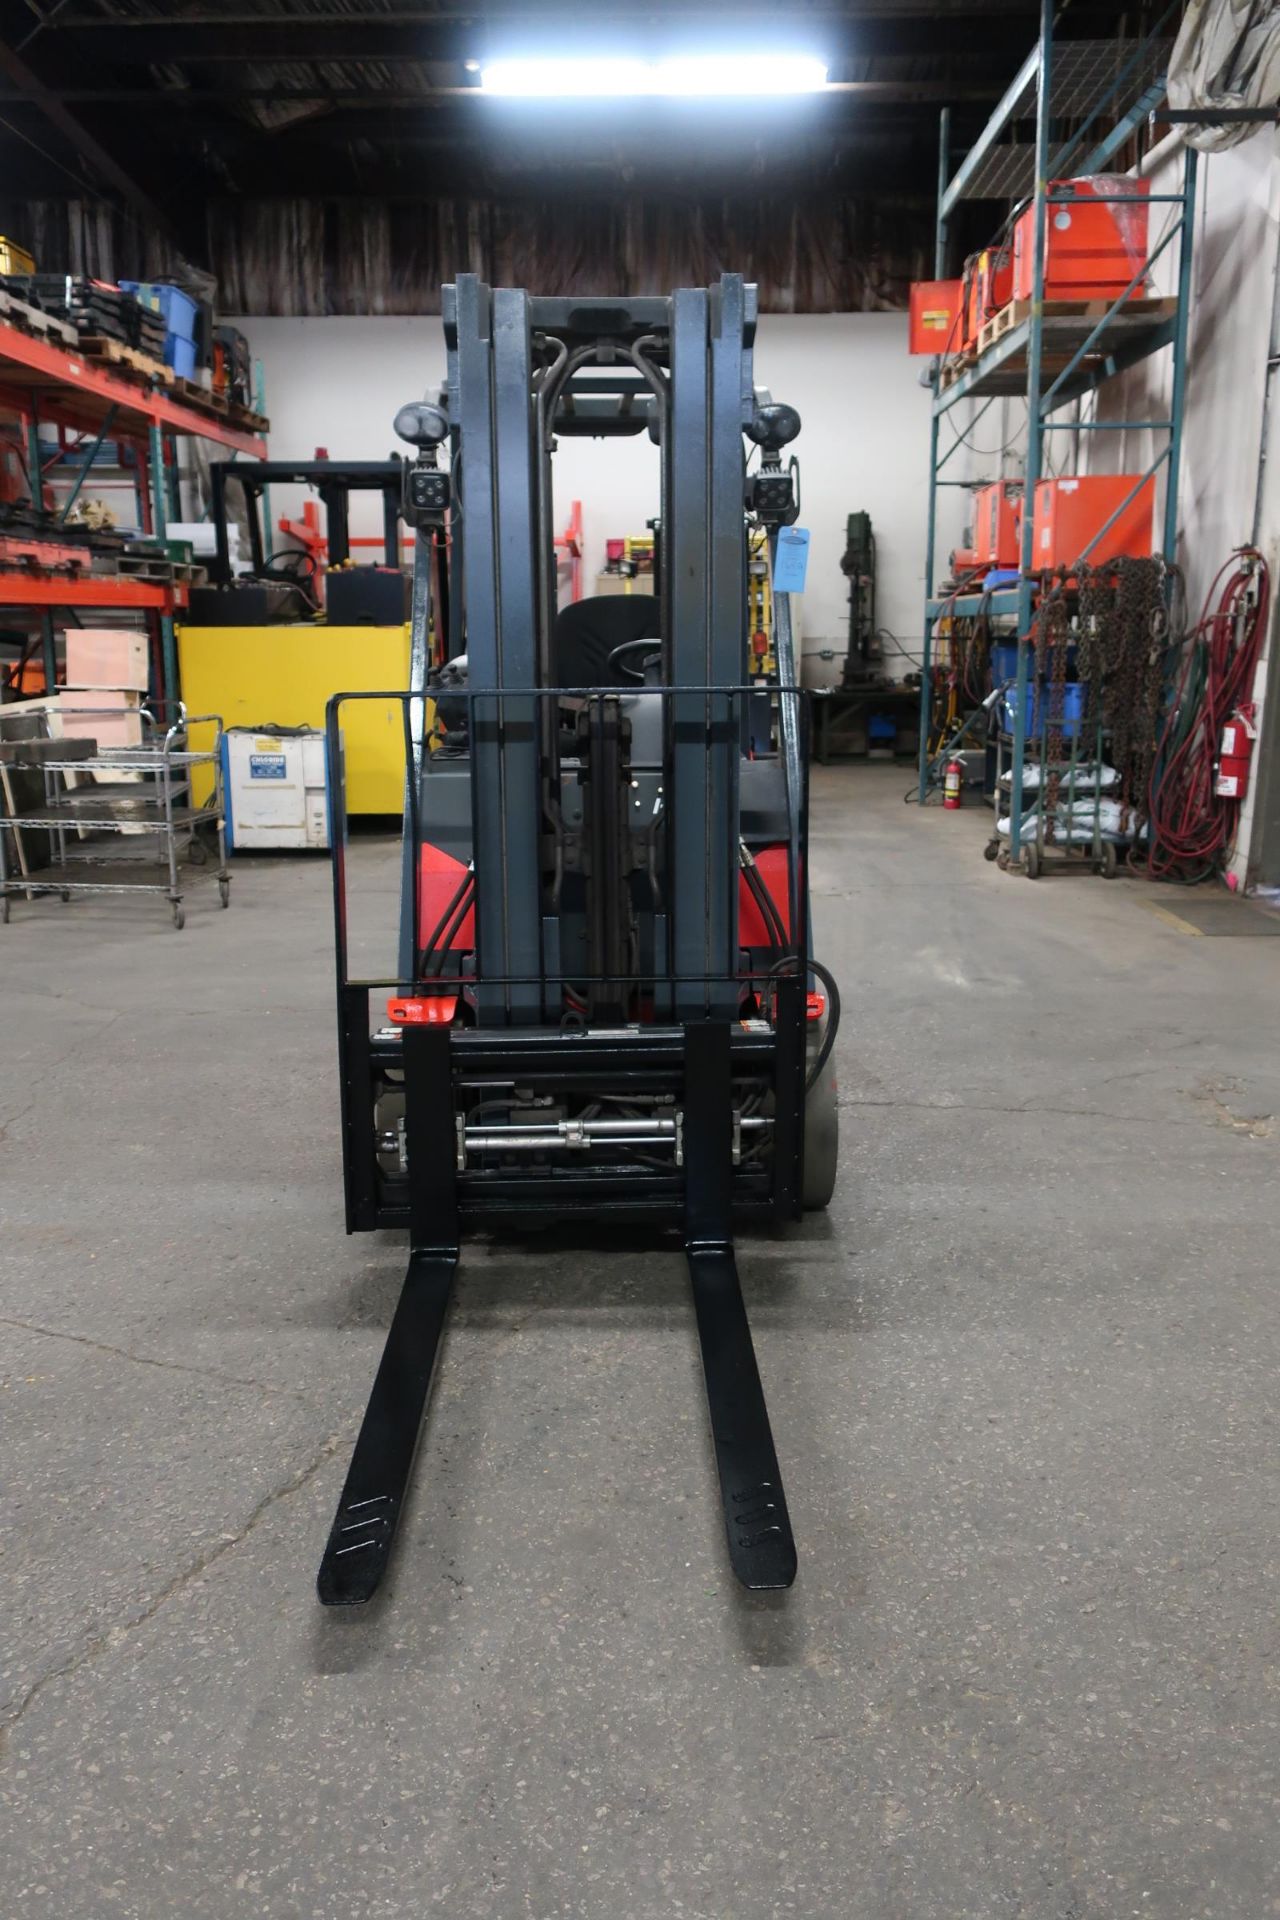 FREE CUSTOMS DOCS & 0 DUTY FEES - 2014 Linde 5250lbs Capacity Forklift with sideshift and 6" BACKUP - Image 3 of 3